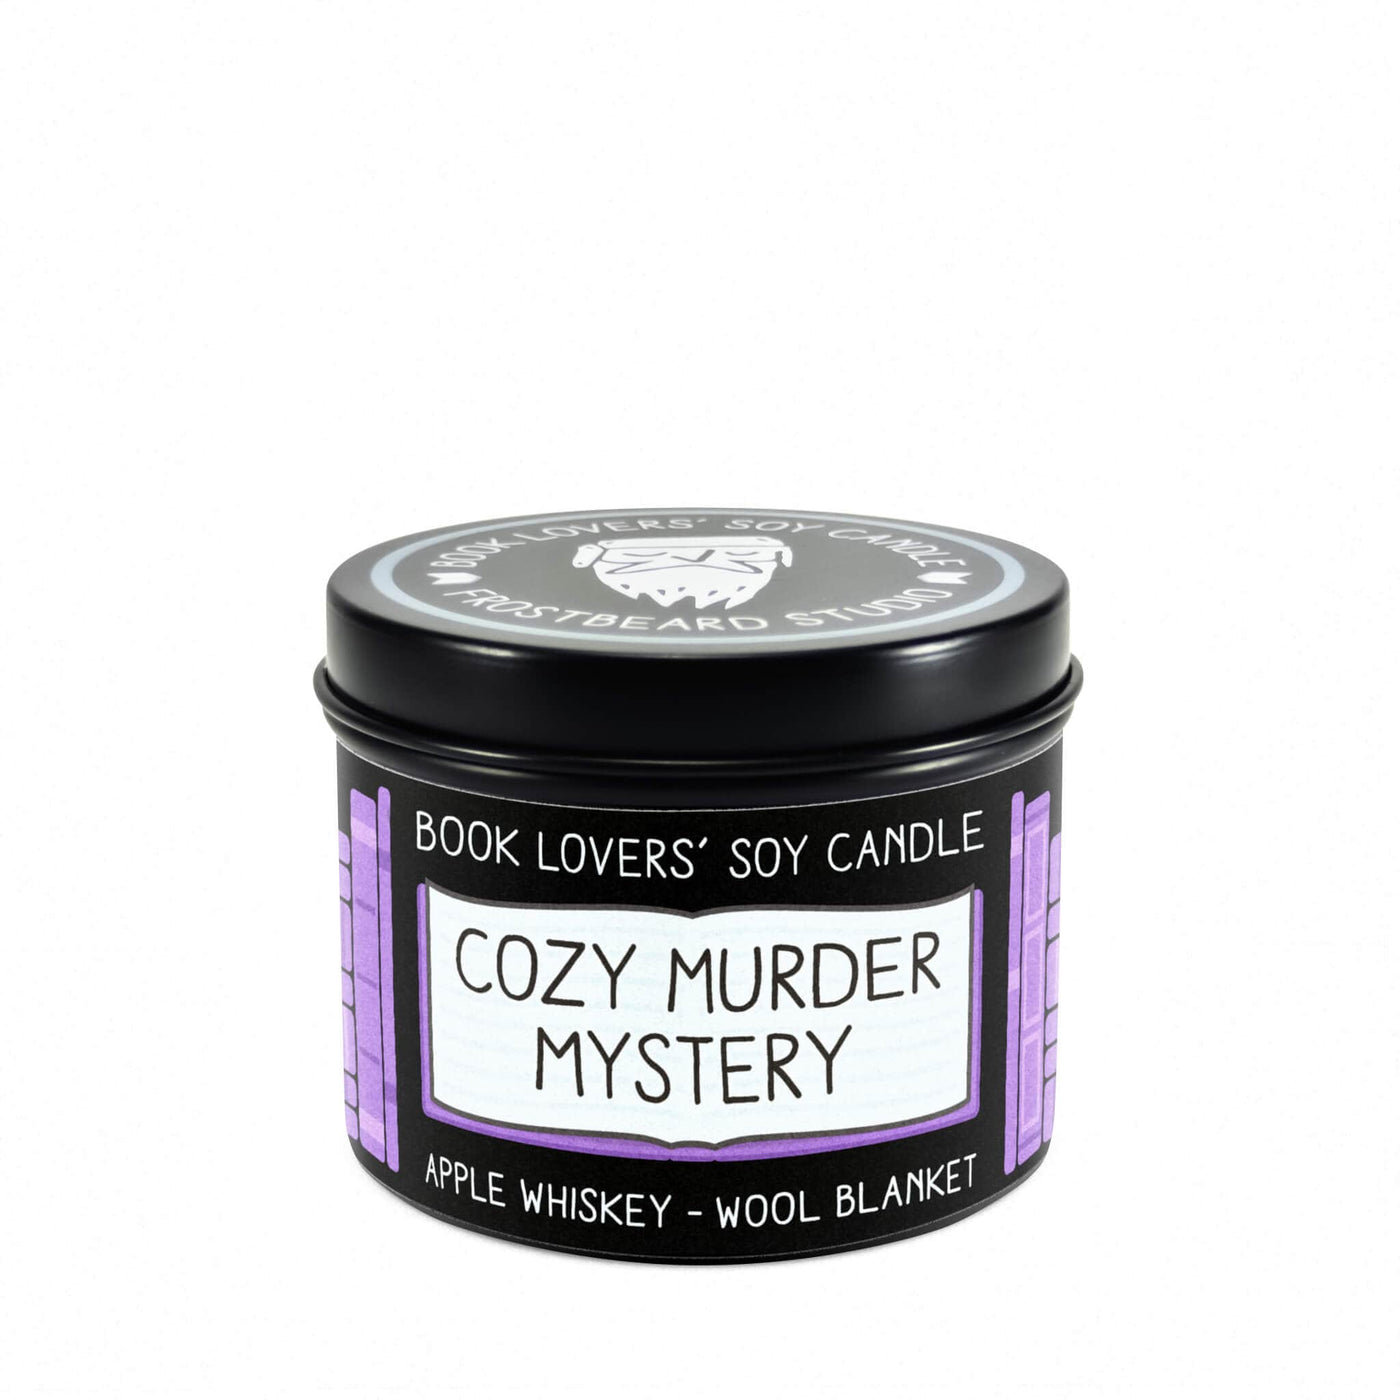 Cozy Murder Mystery  -  4 oz Tin  -  Book Lovers' Soy Candle  -  Frostbeard Studio